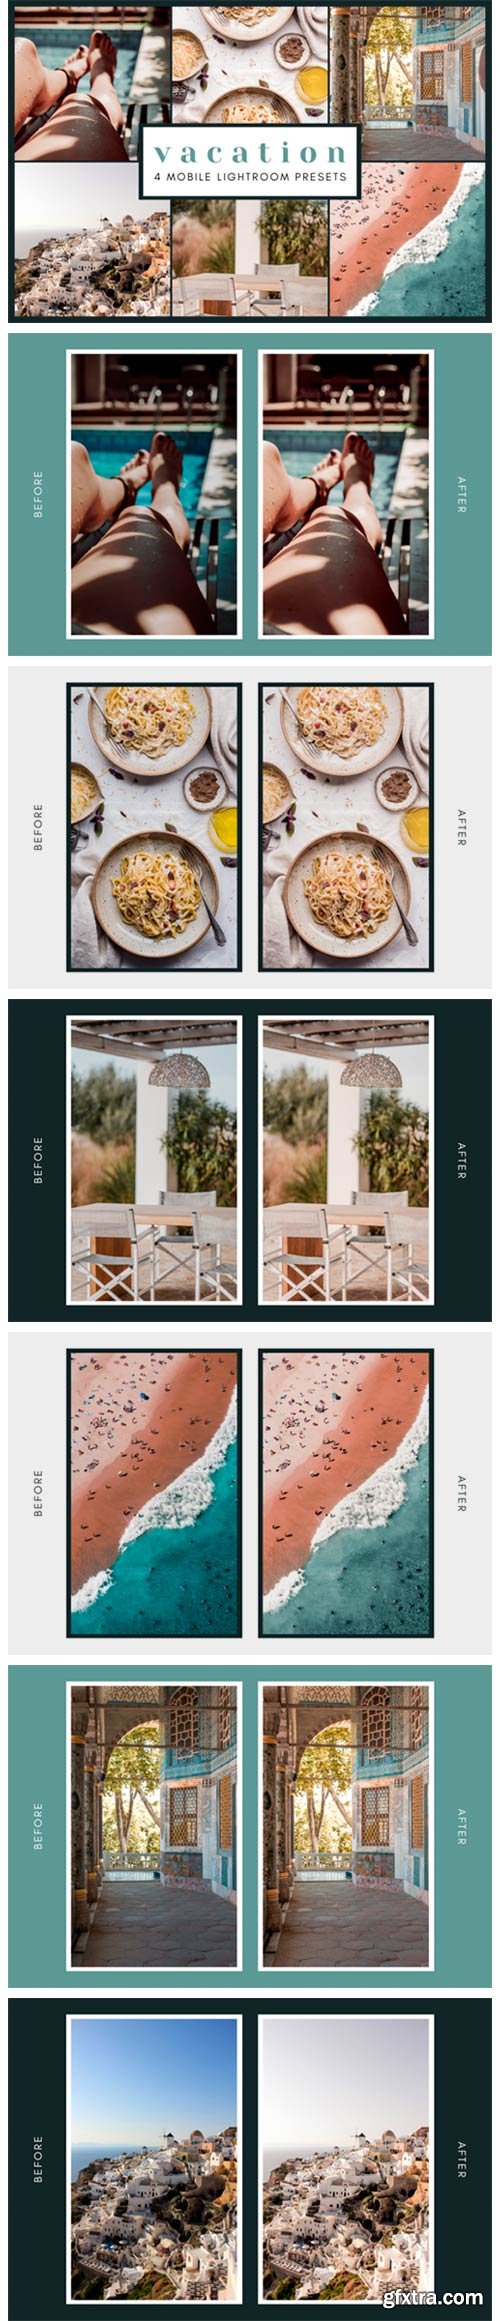 4 Mobile Lightroom Presets | Vacations 2651879